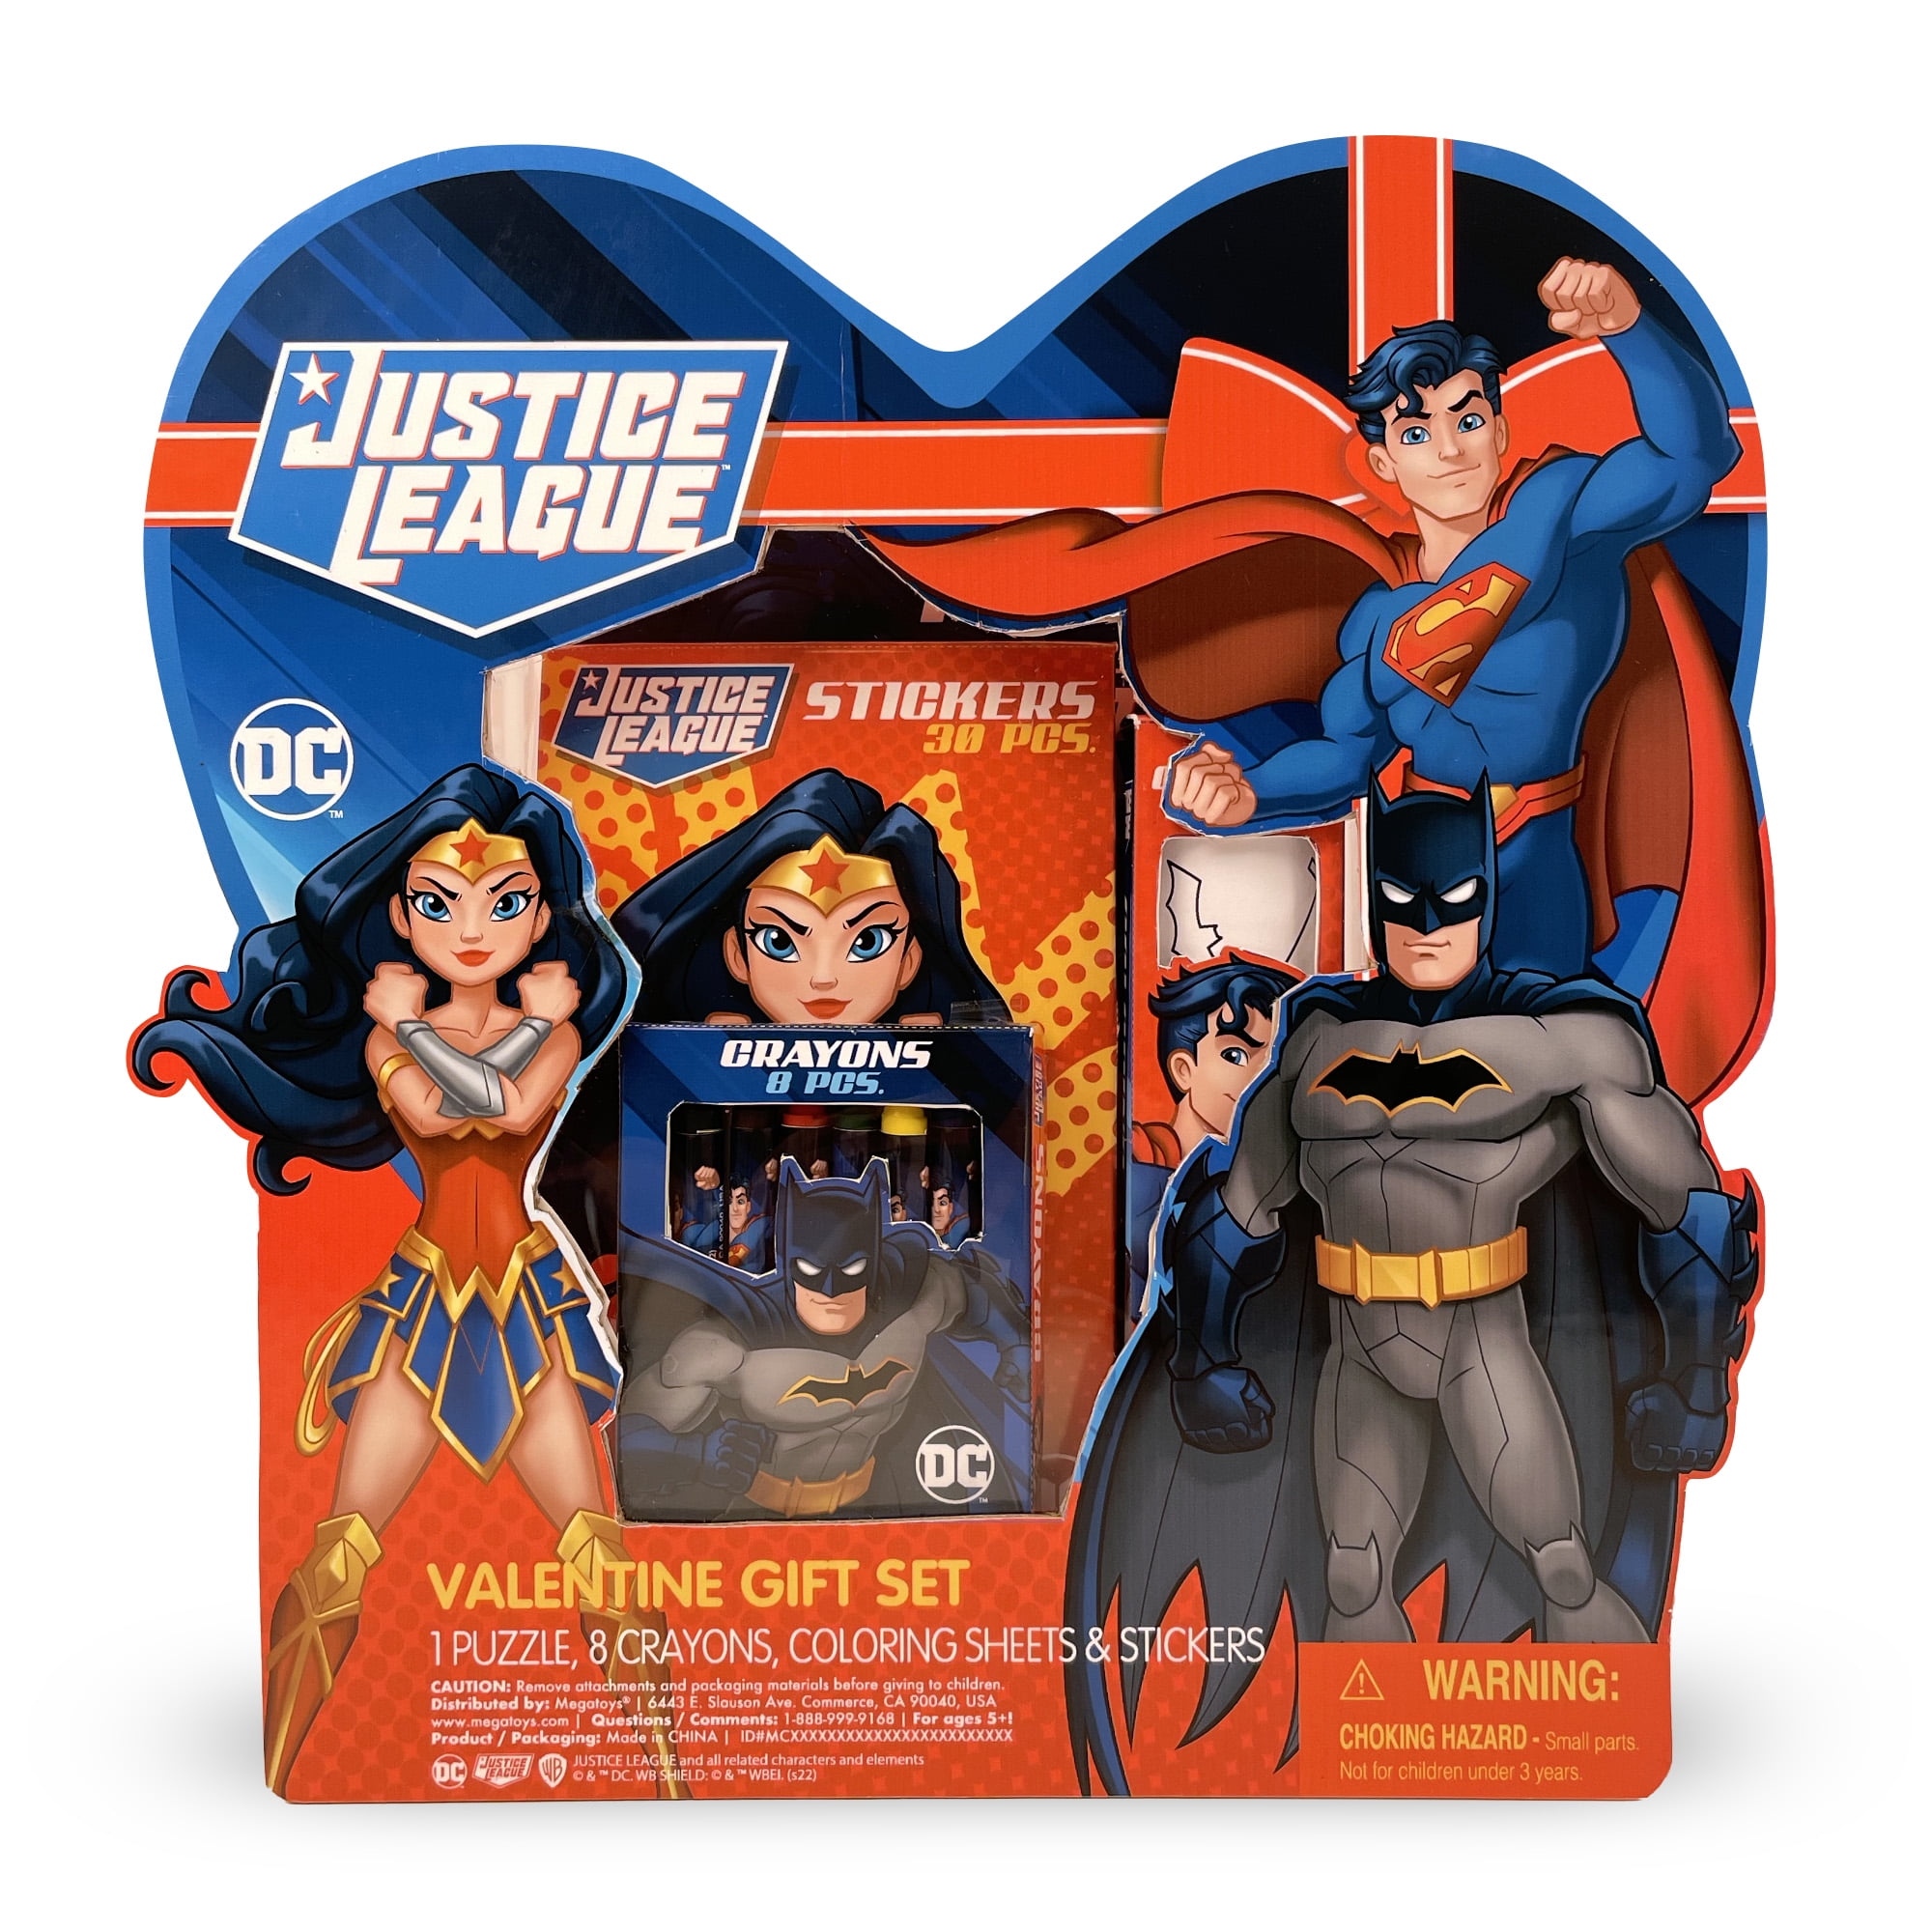 Justice League Valentine's Day Box Gift Set